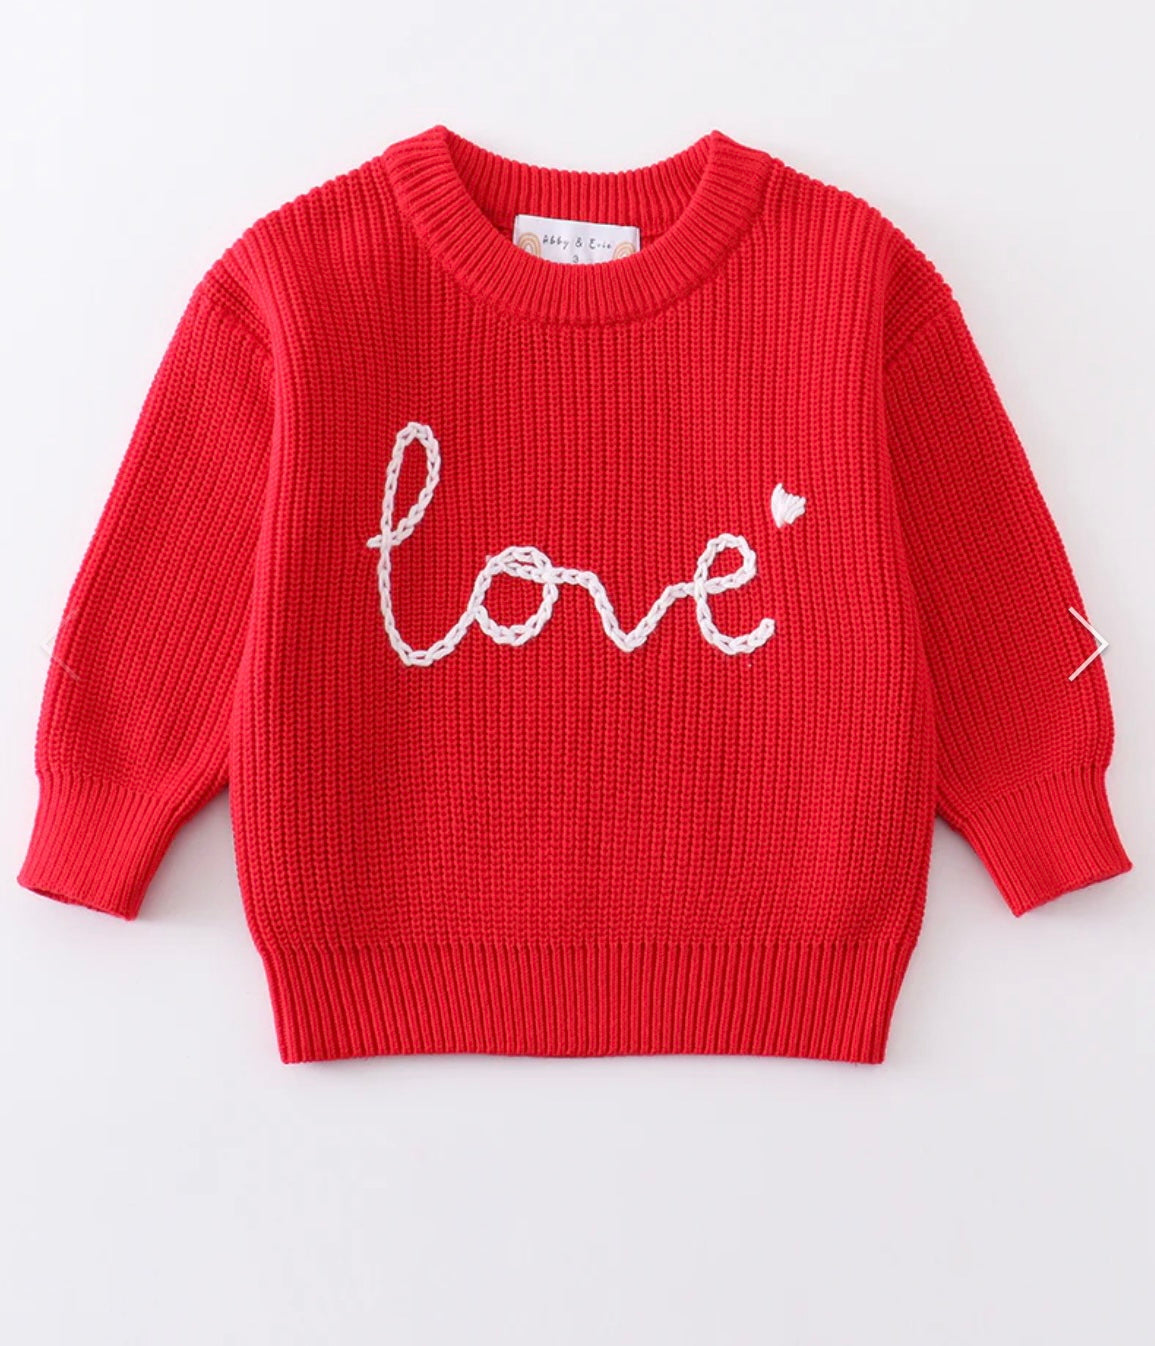 Red Embroidered LOVE sweater